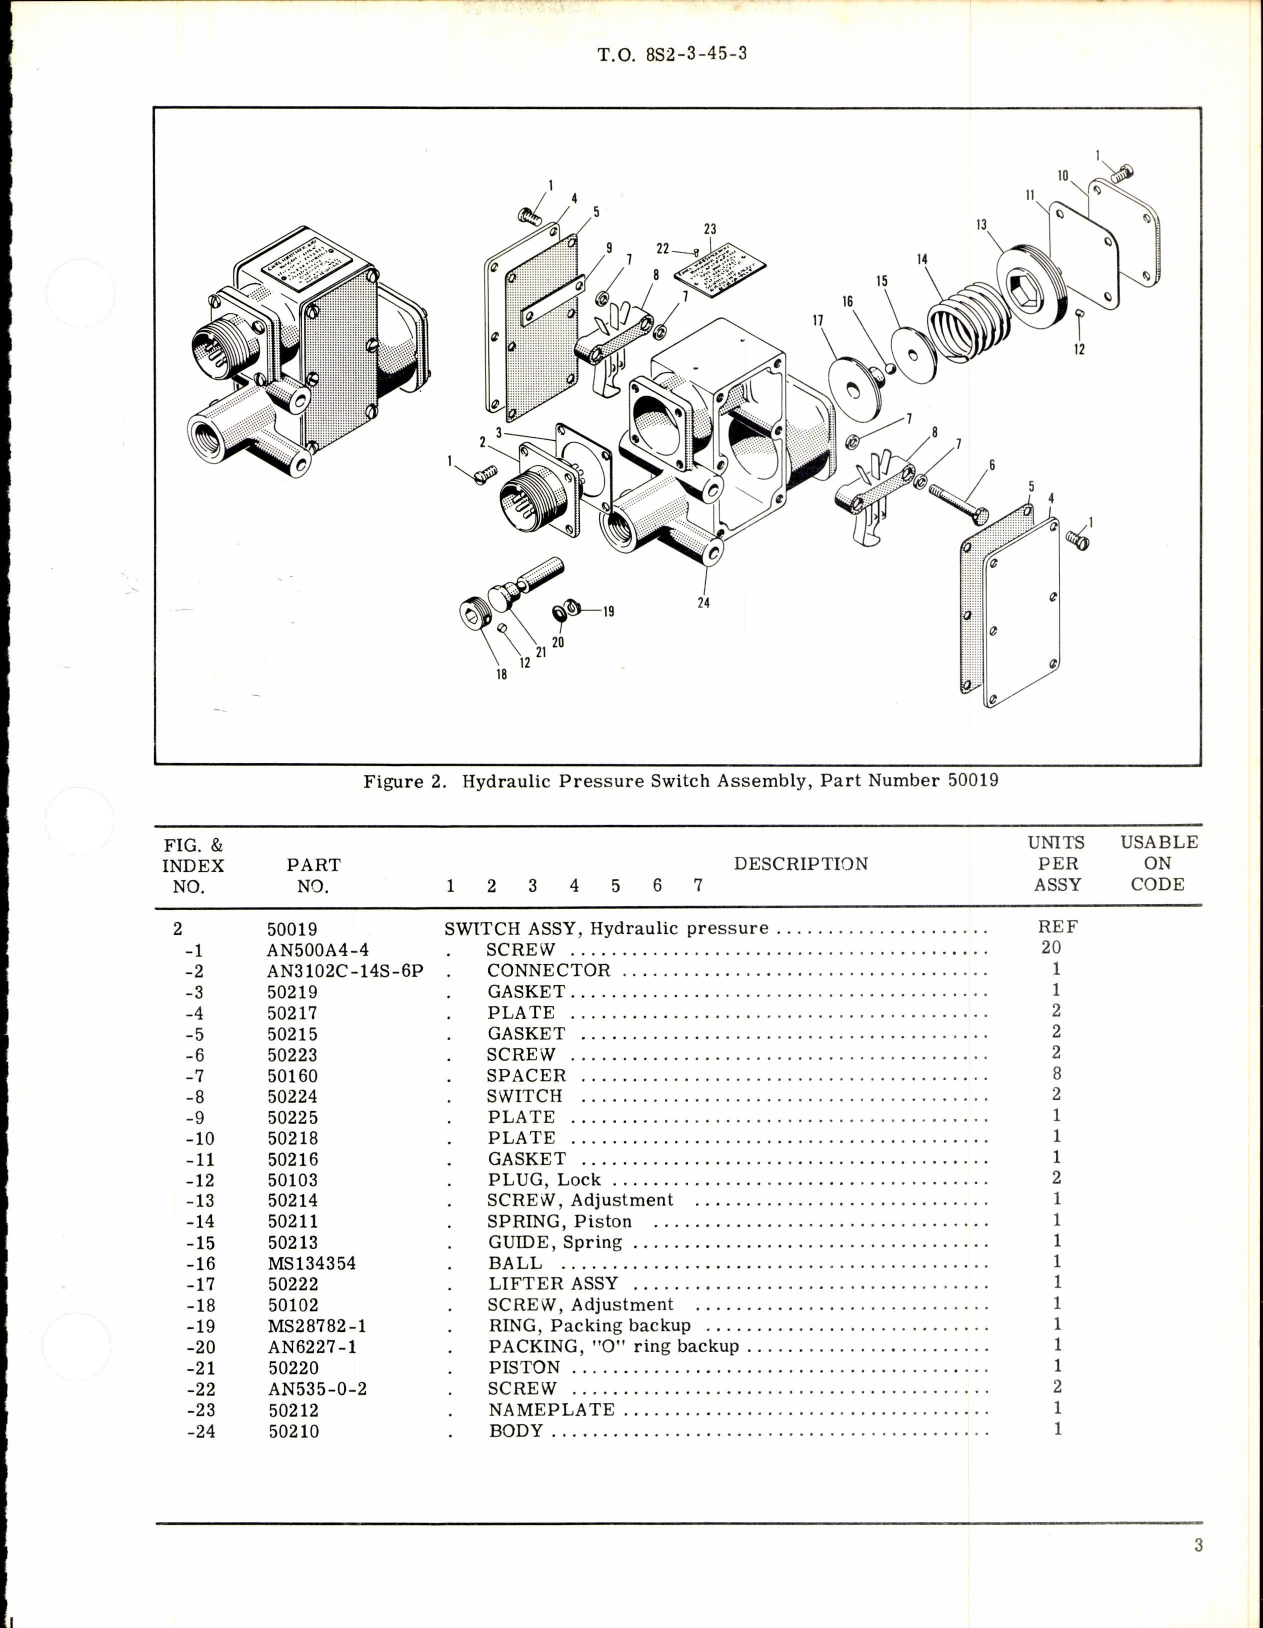 Sample page 3 from AirCorps Library document: Hydraulic Pressure Switch Part No 50019